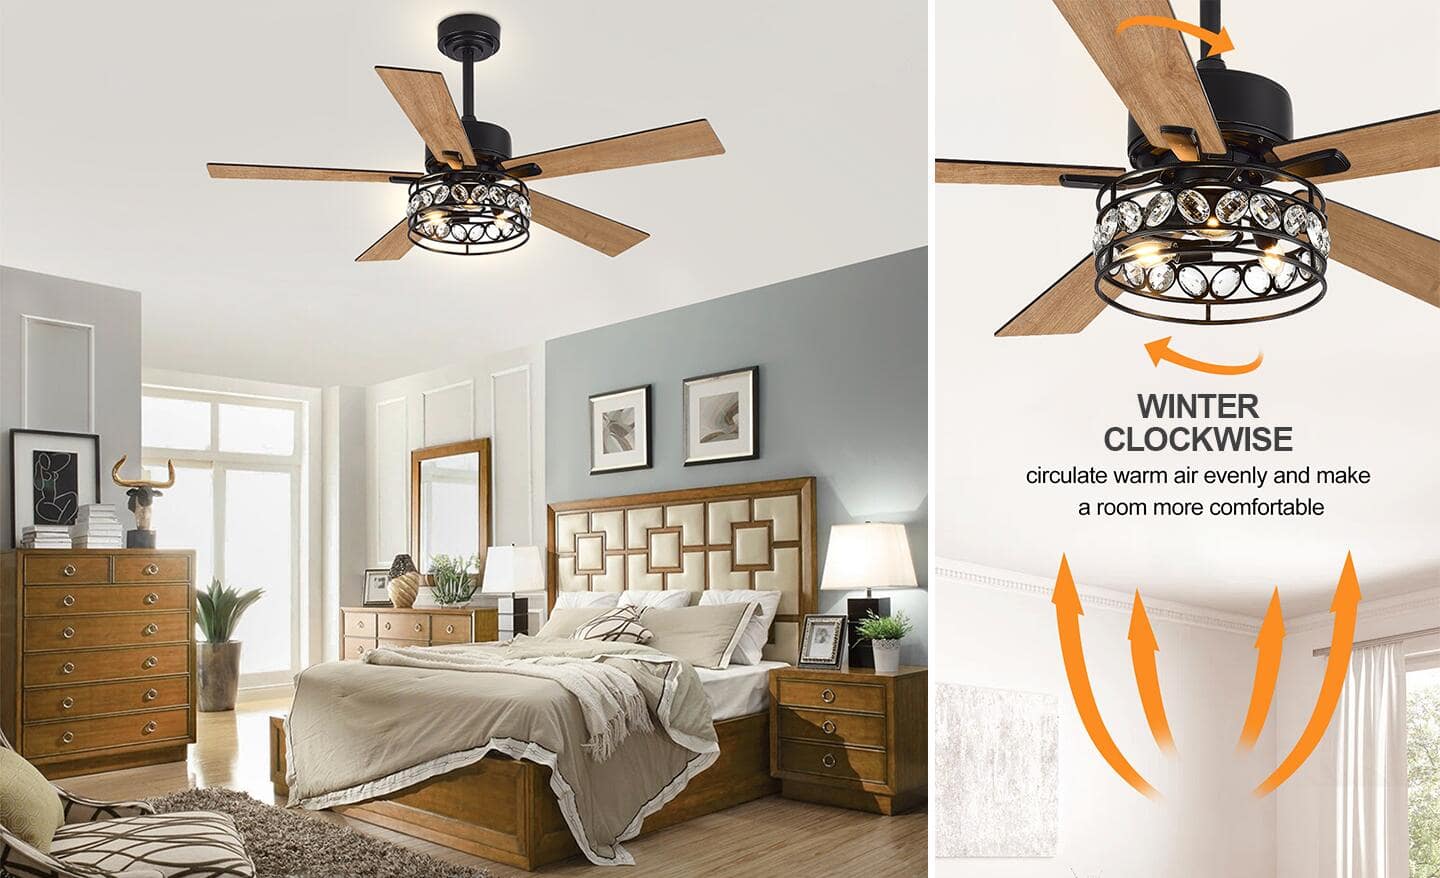 A wood ceiling fan hanging over a cozy bedroom in the winter months.